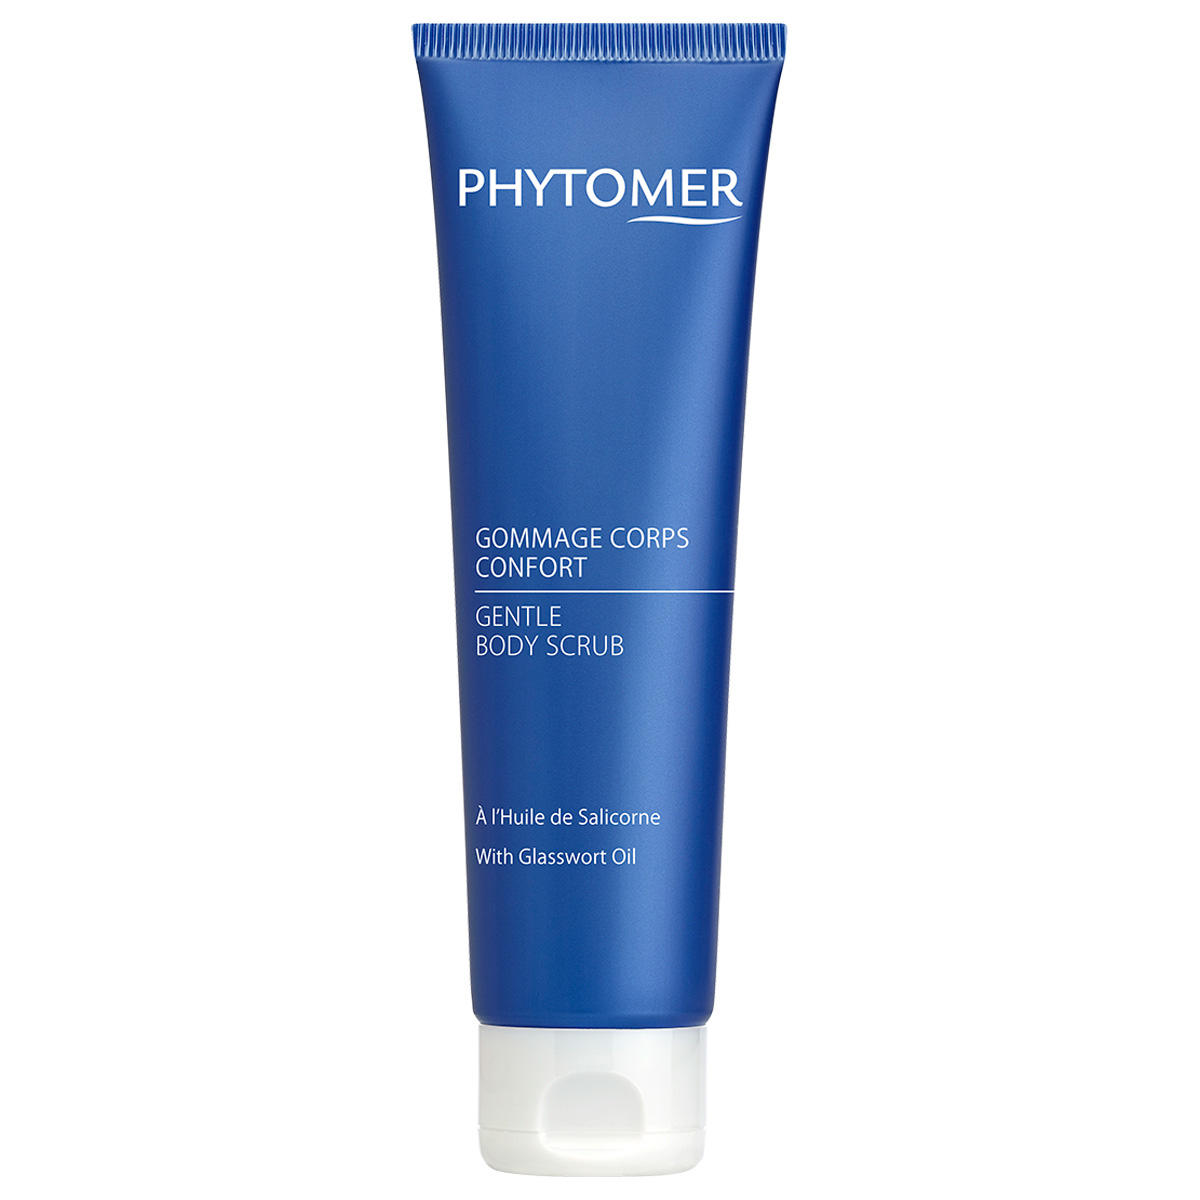 PHYTOMER GOMMAGE CORPS CONFORT 150 ml - 1